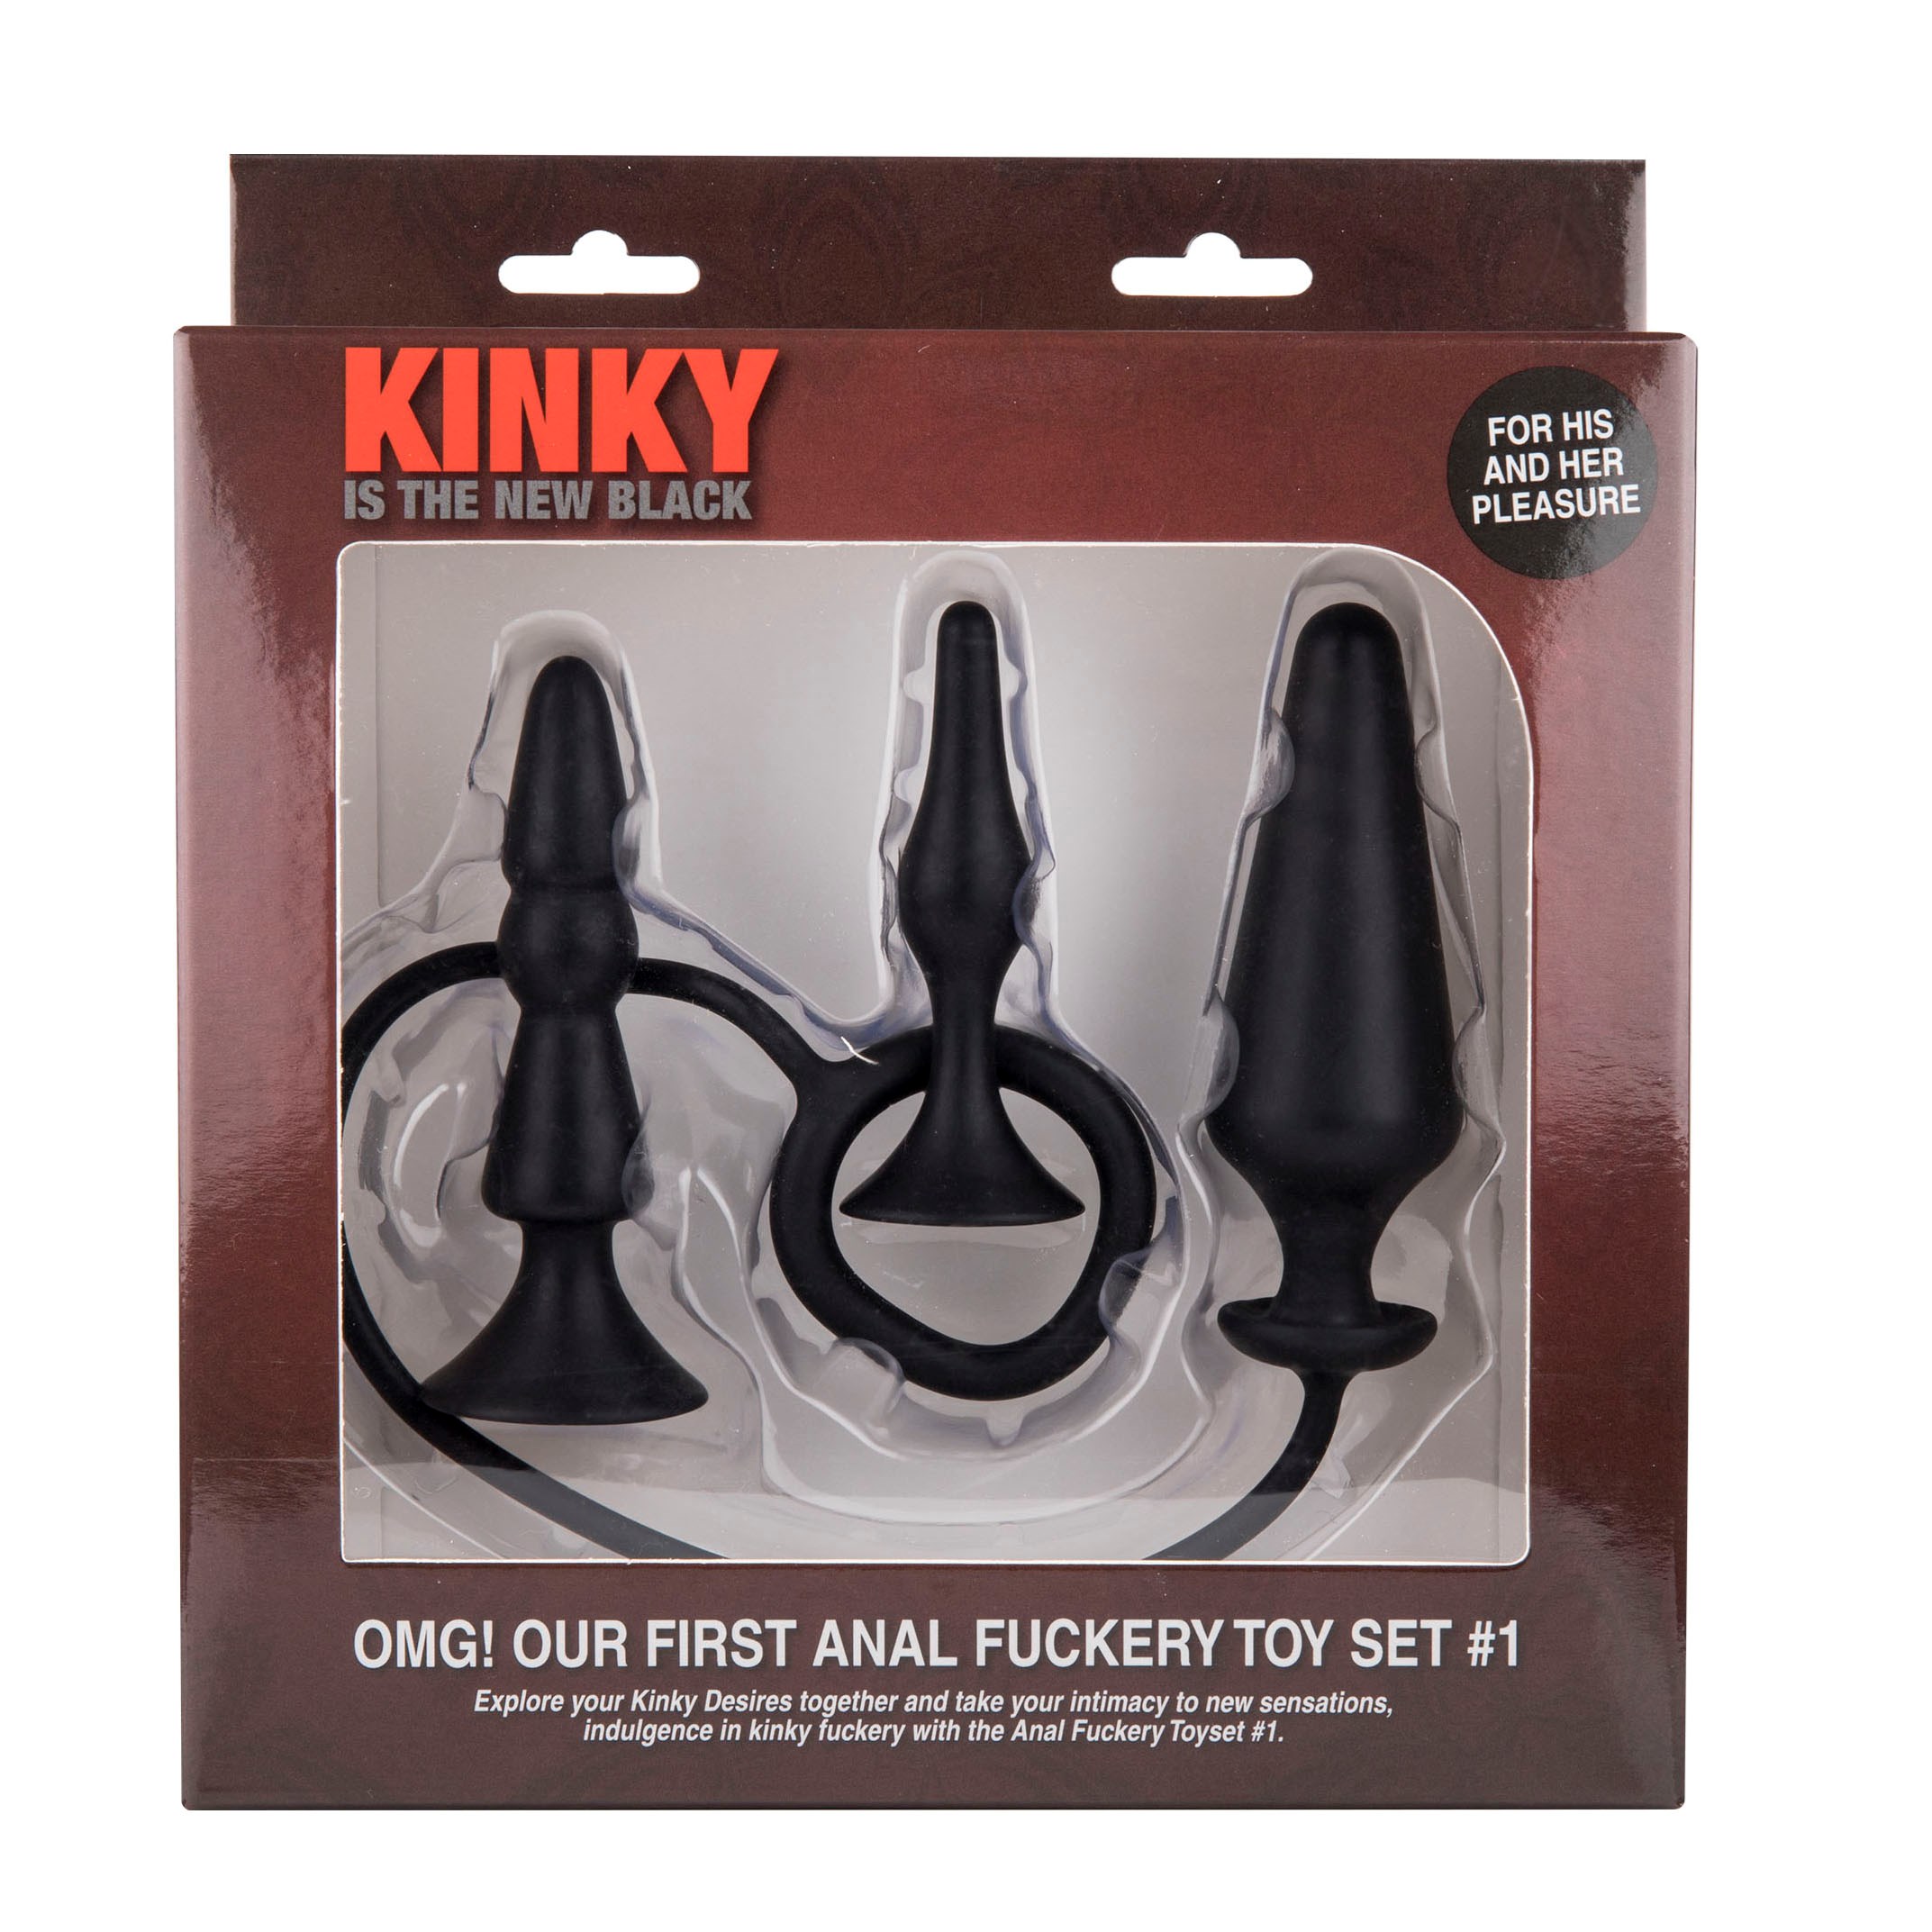 OMG! OUR FIRST ANAL FUCKERY TOY SET #1